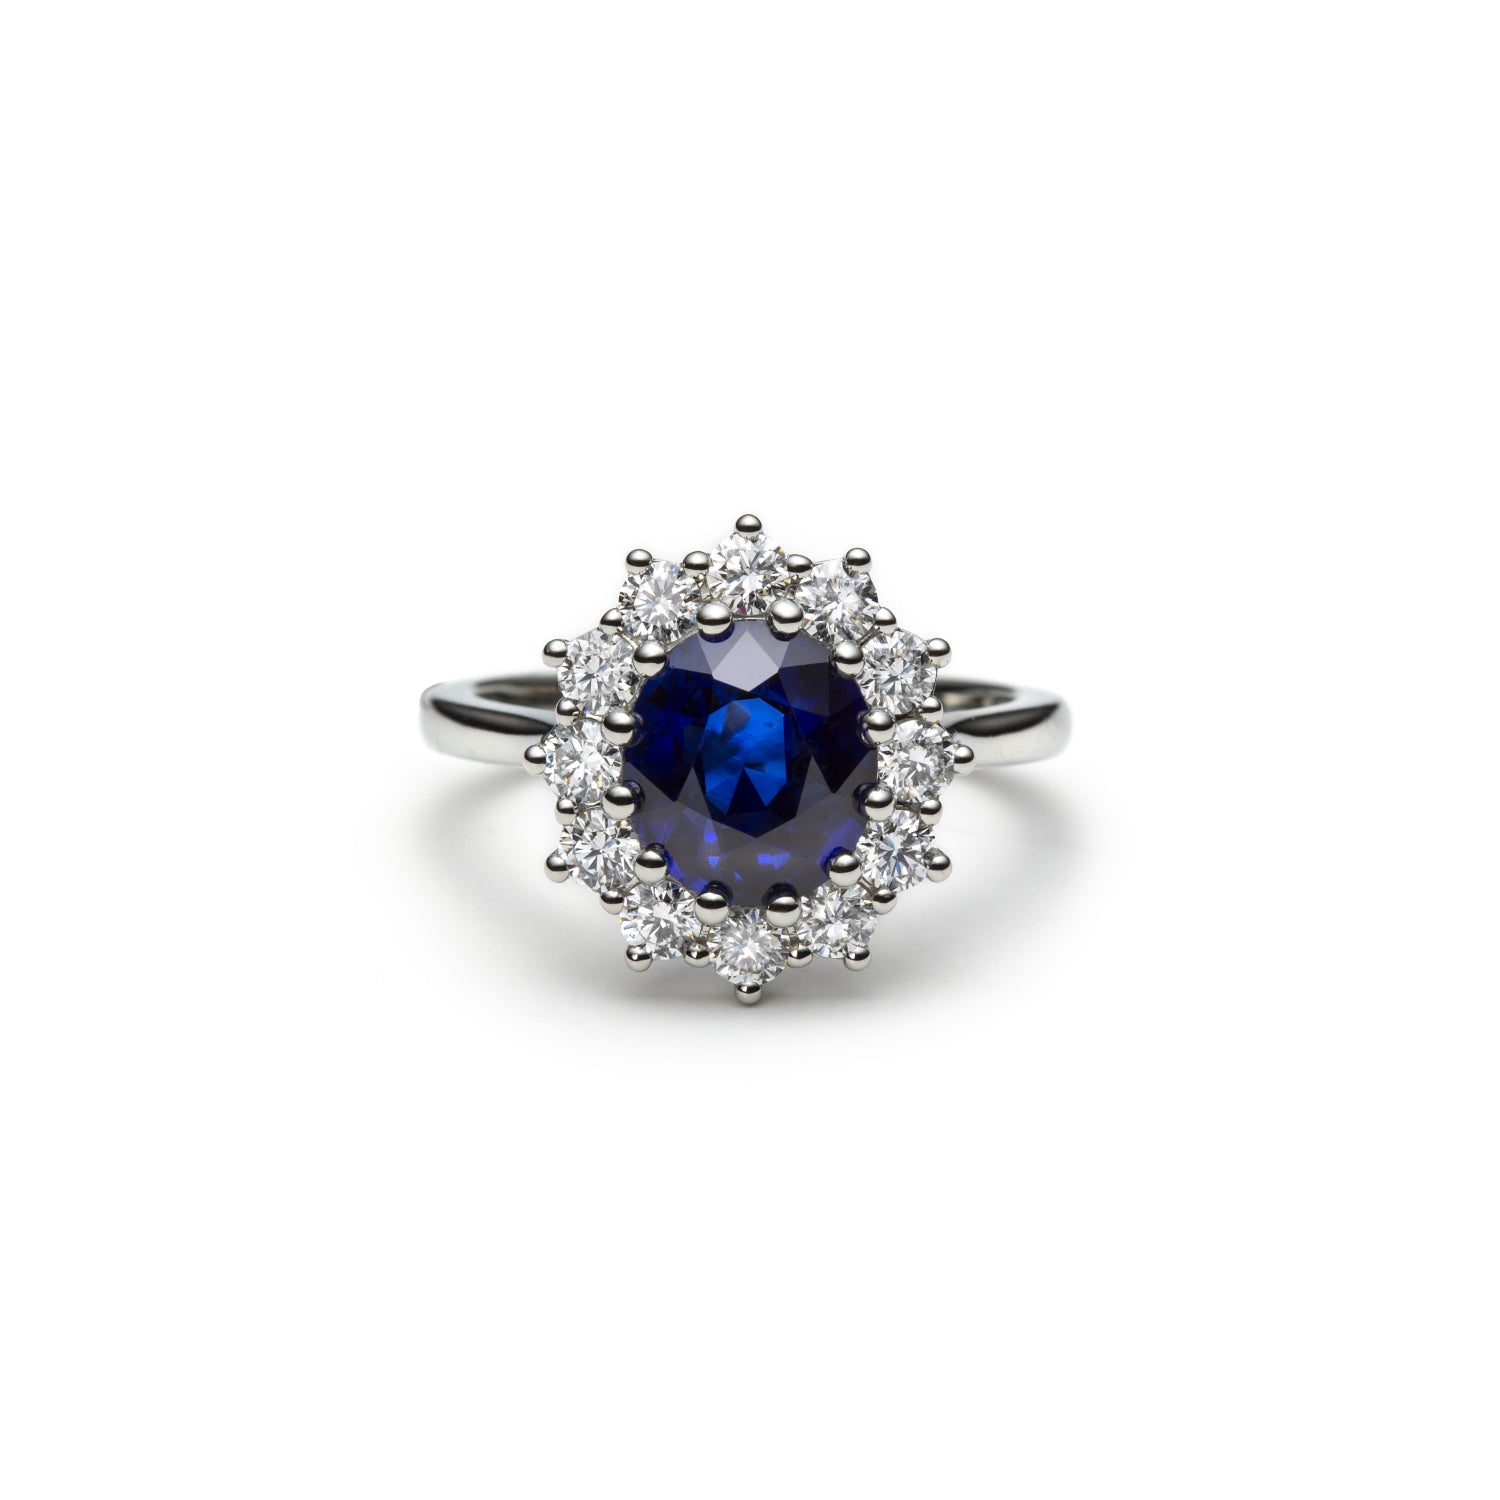 Oval-Shaped Royal Blue Sapphire and Round Brilliant Cut Diamond Cluster Ring